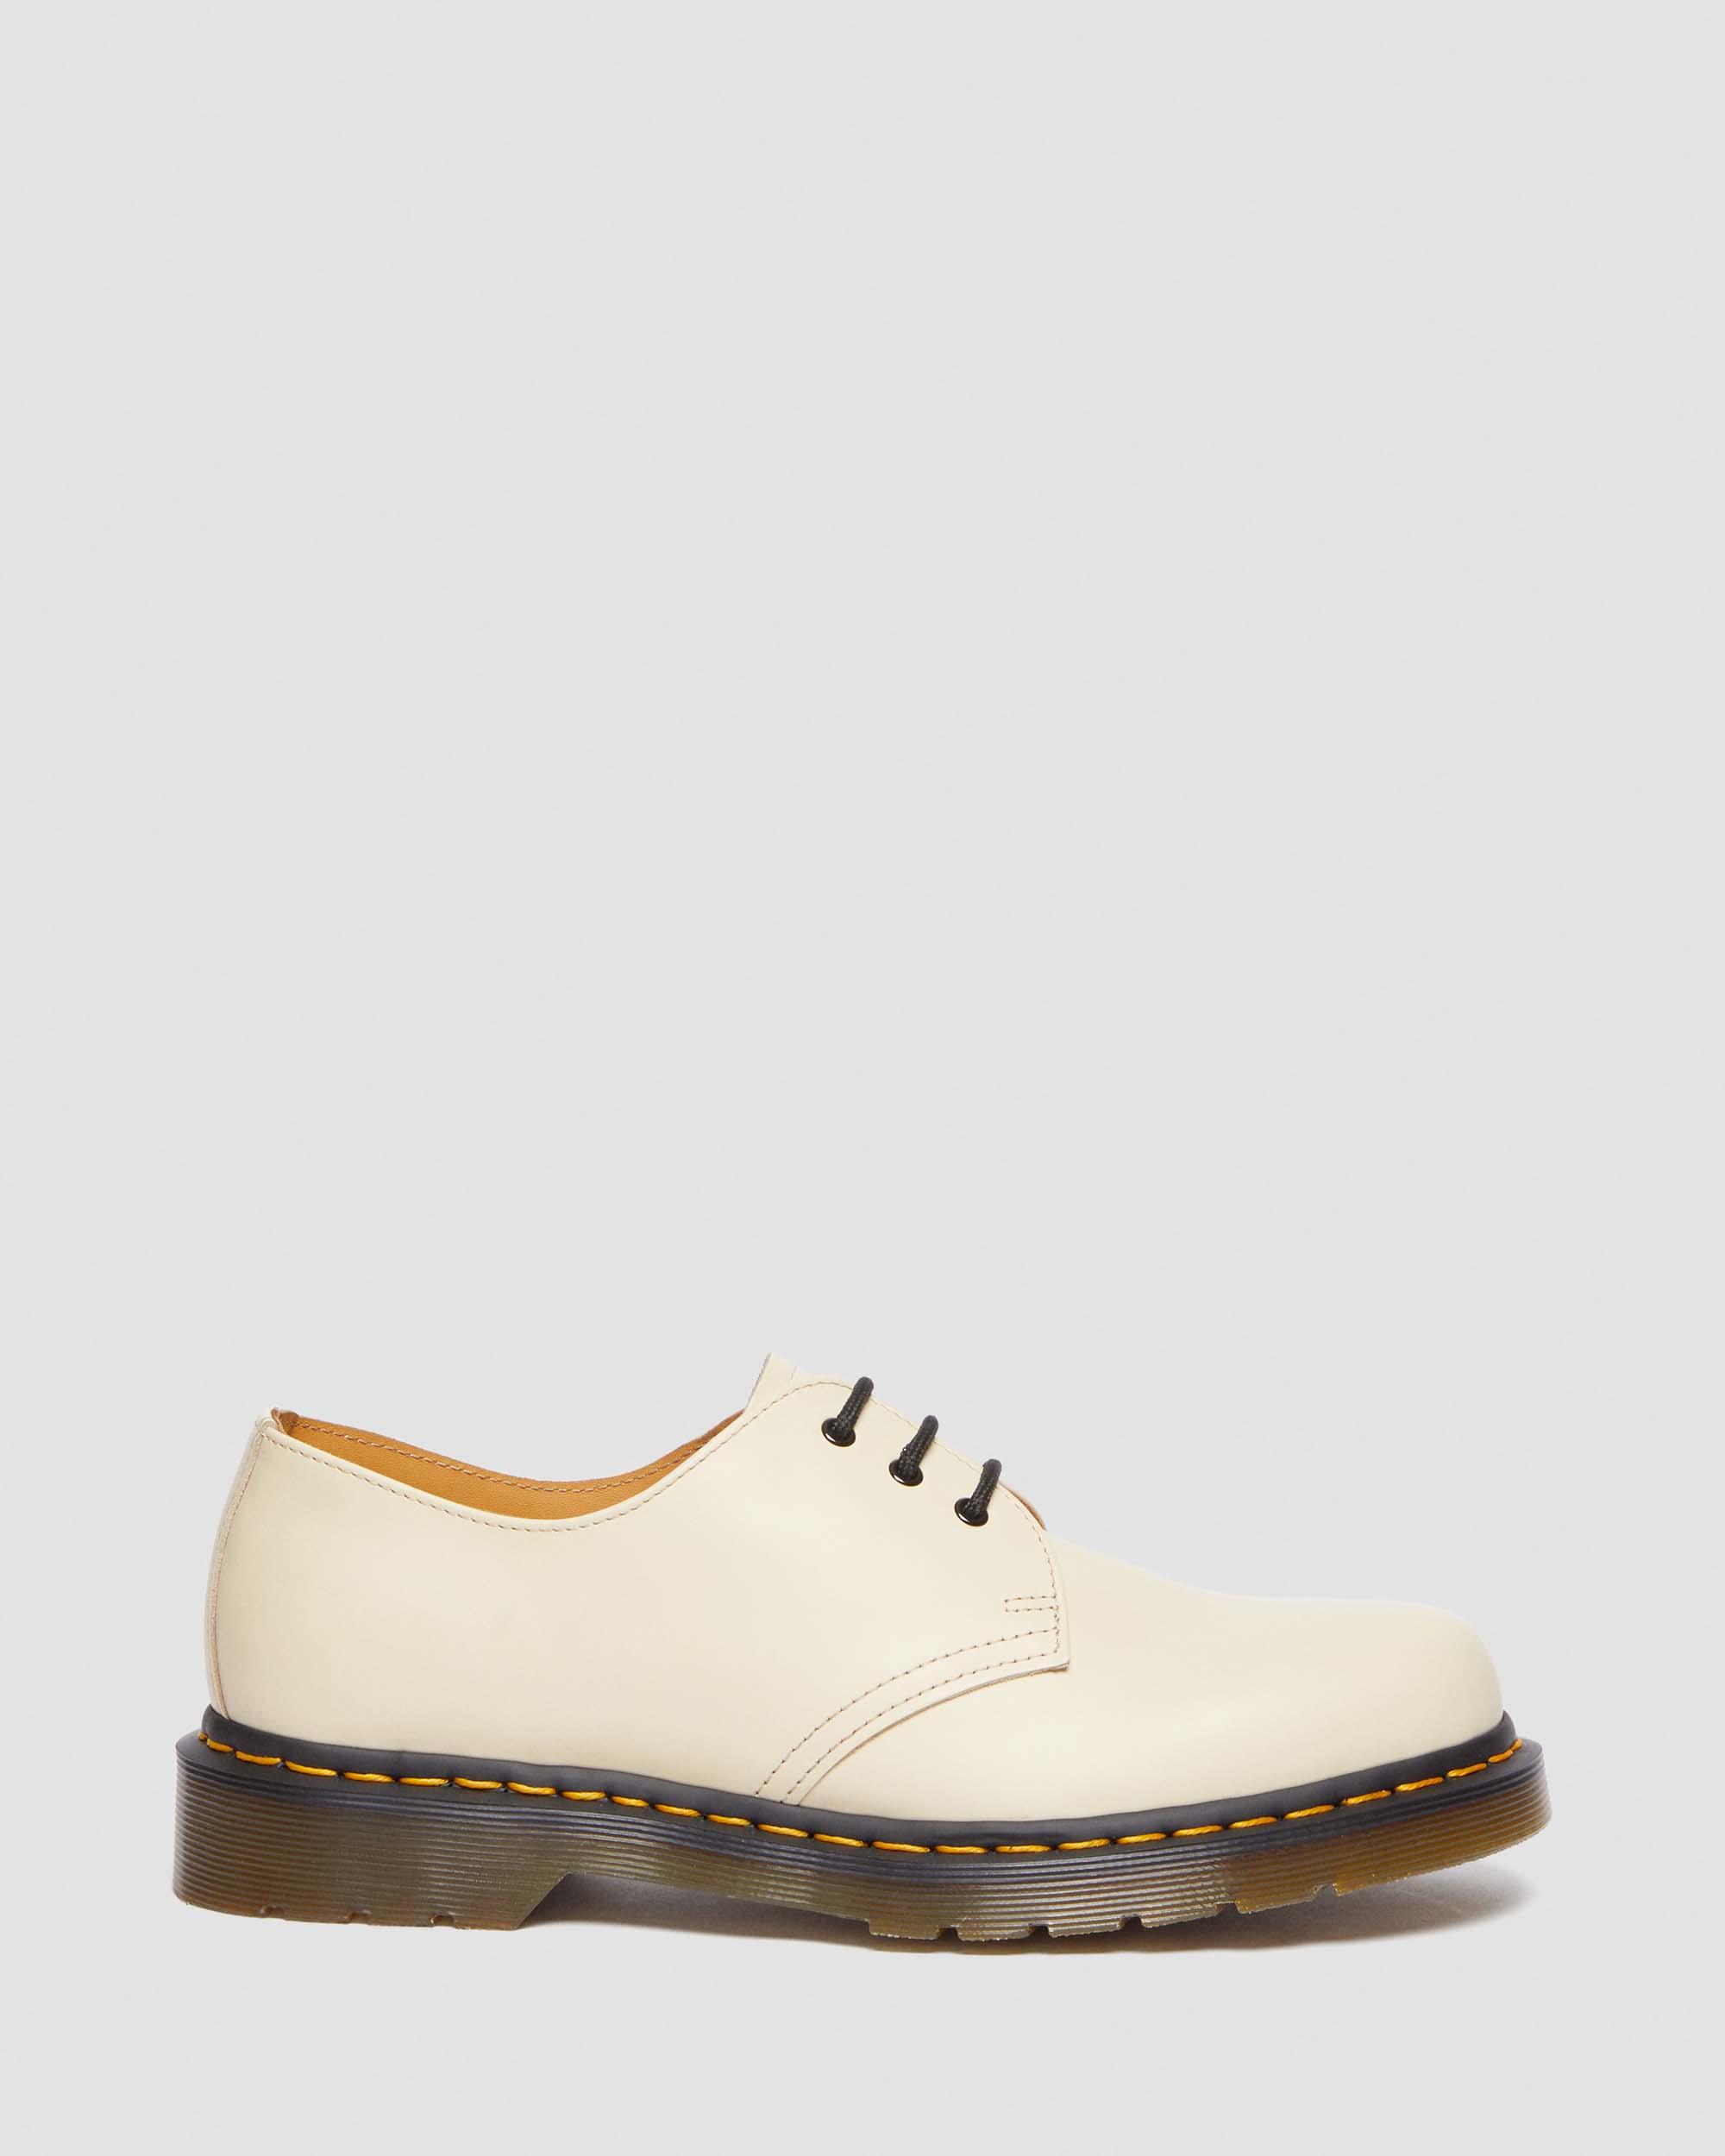 1461 Smooth Leather Oxford Shoes in Parchment Beige | Dr. Martens